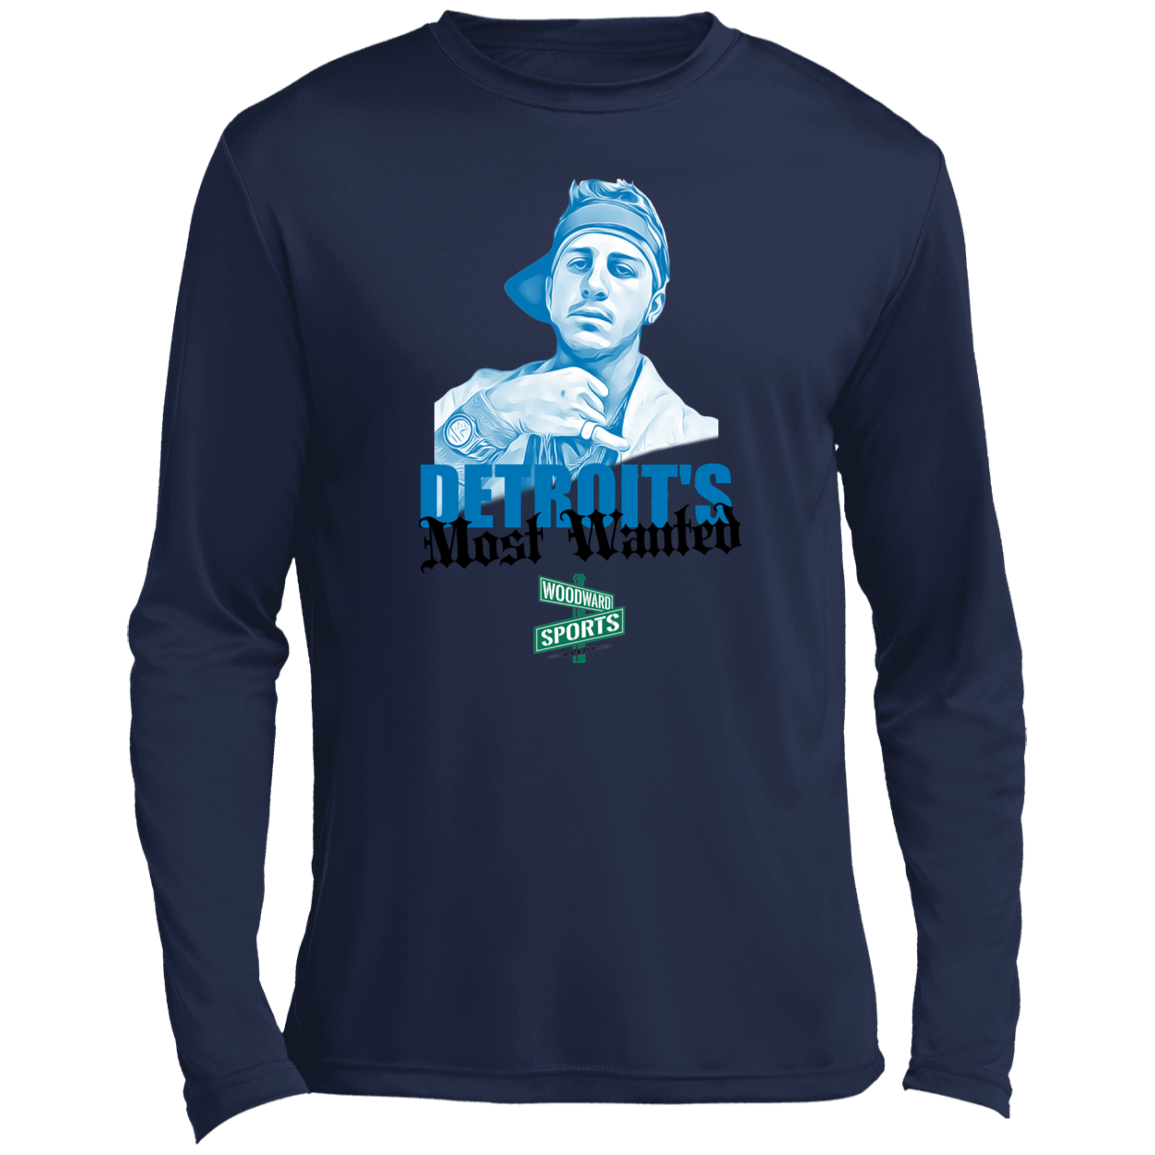 Most Wanted Long Sleeve Performance Tee